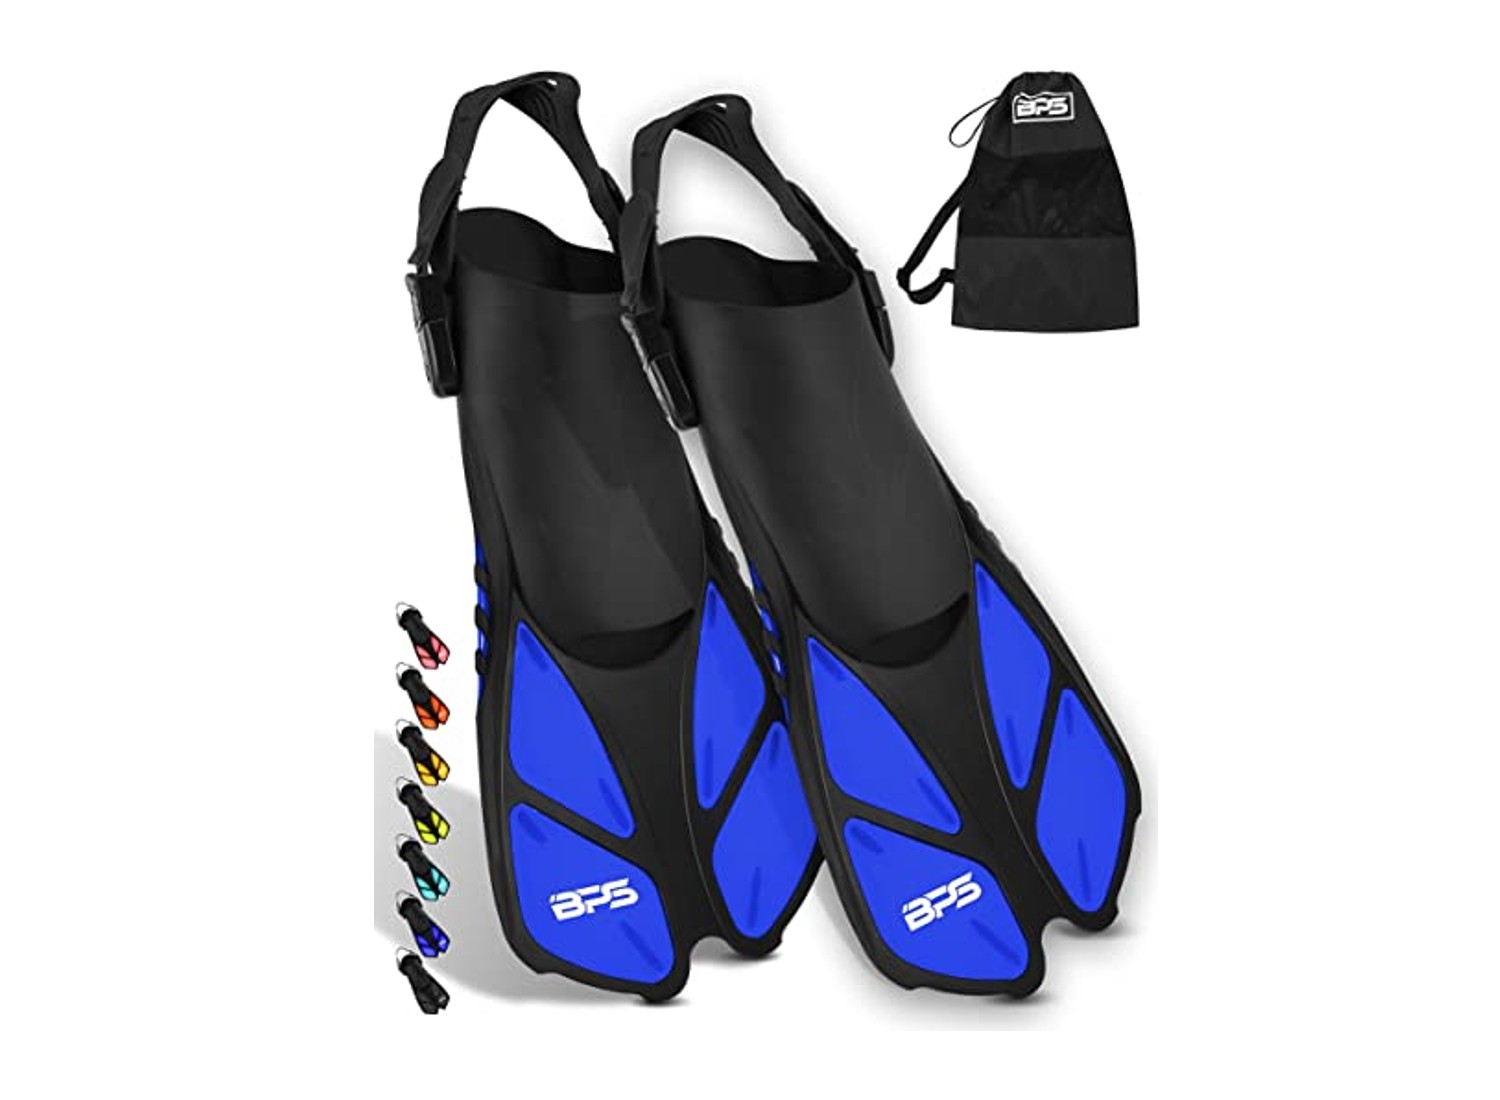 flippers for swimming review